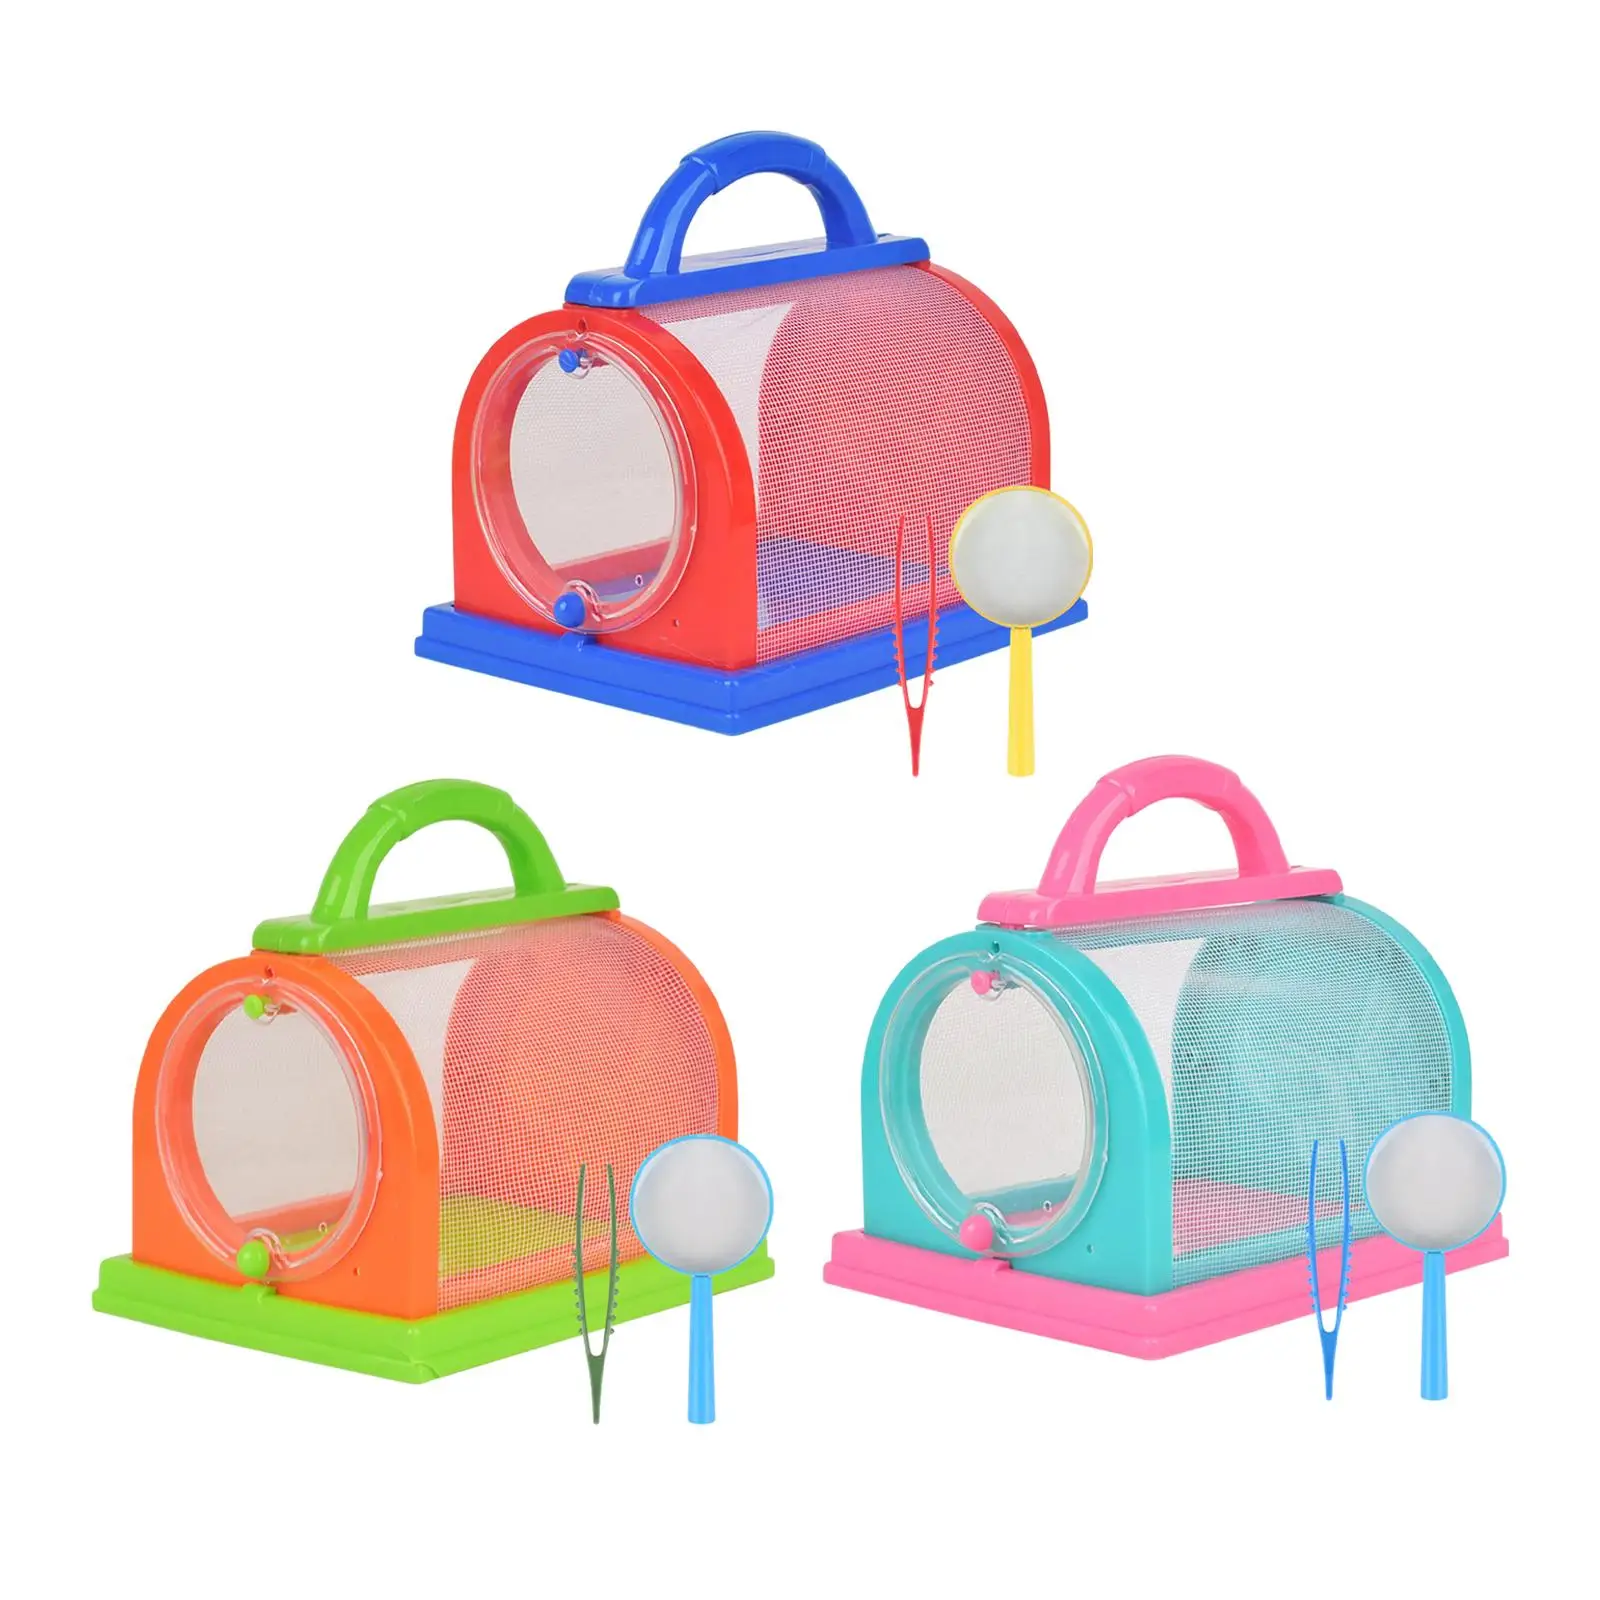 Butterfly Exploration Activity Portable Cage Observe Viewer Container for Outdoor Childs Toy DIY Experiments Camping Hiking